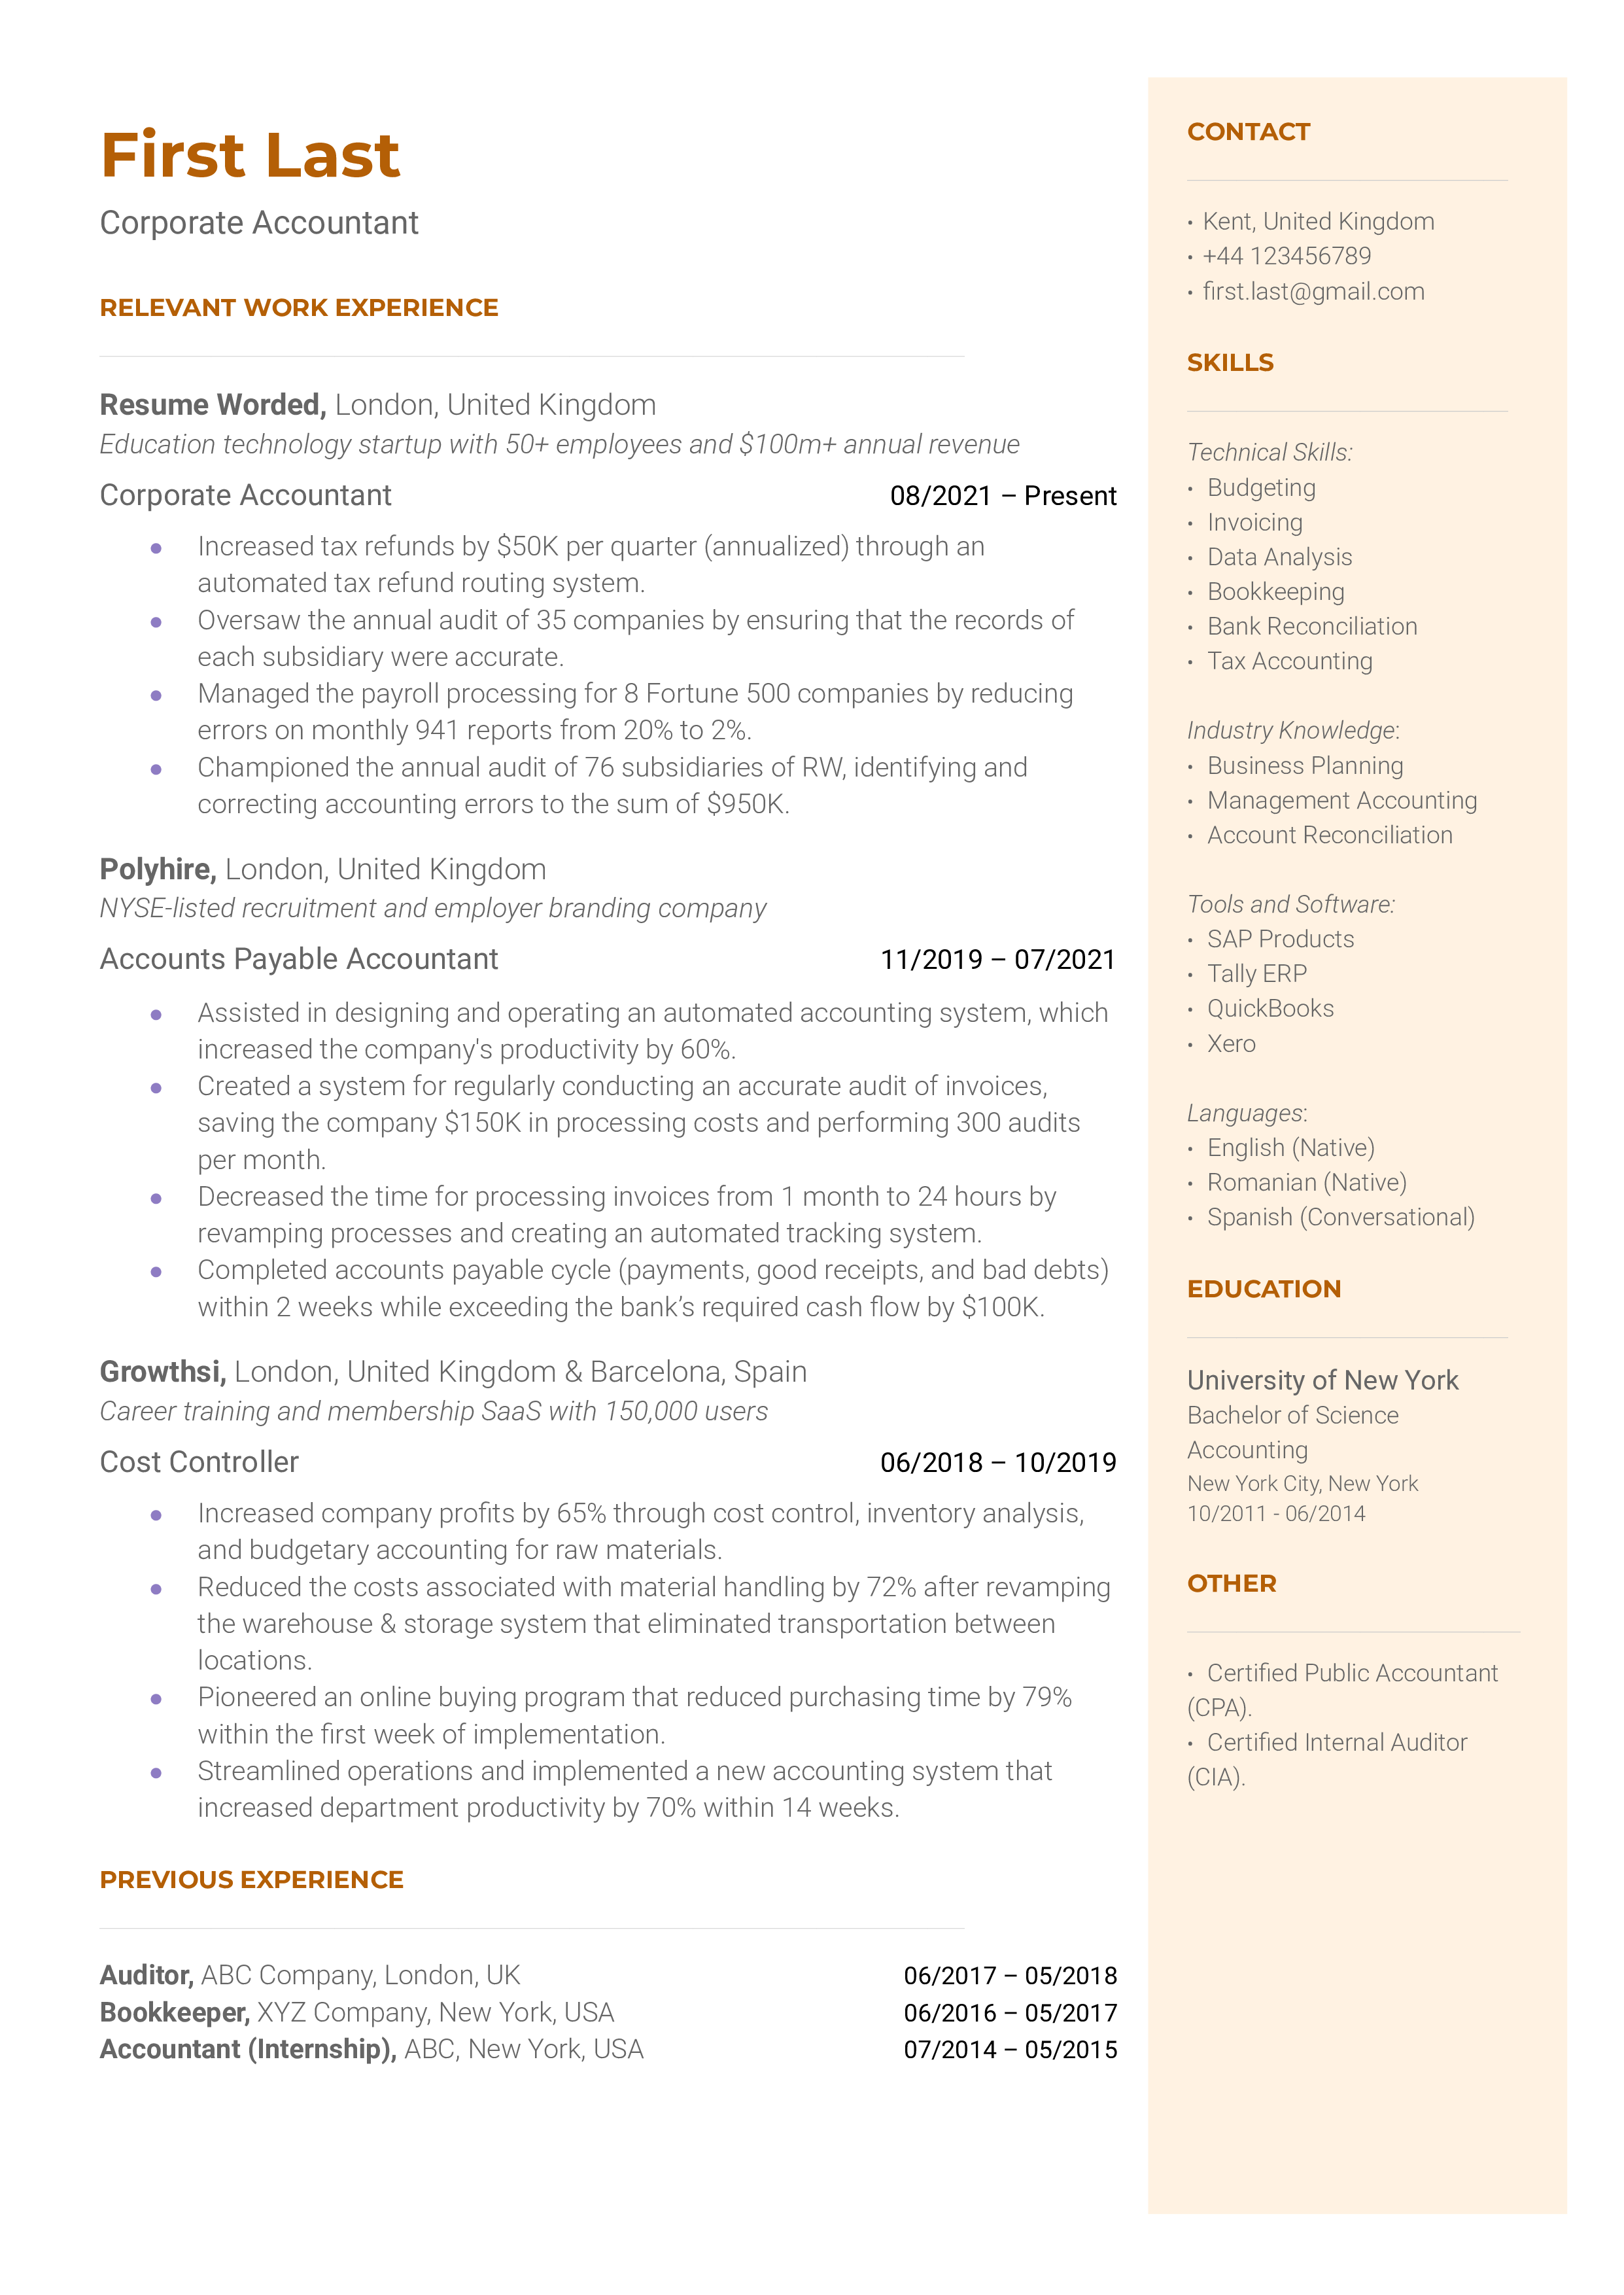 A corporate accountant resume sample that highlights the applicant’s accounting skills and corporate experience.